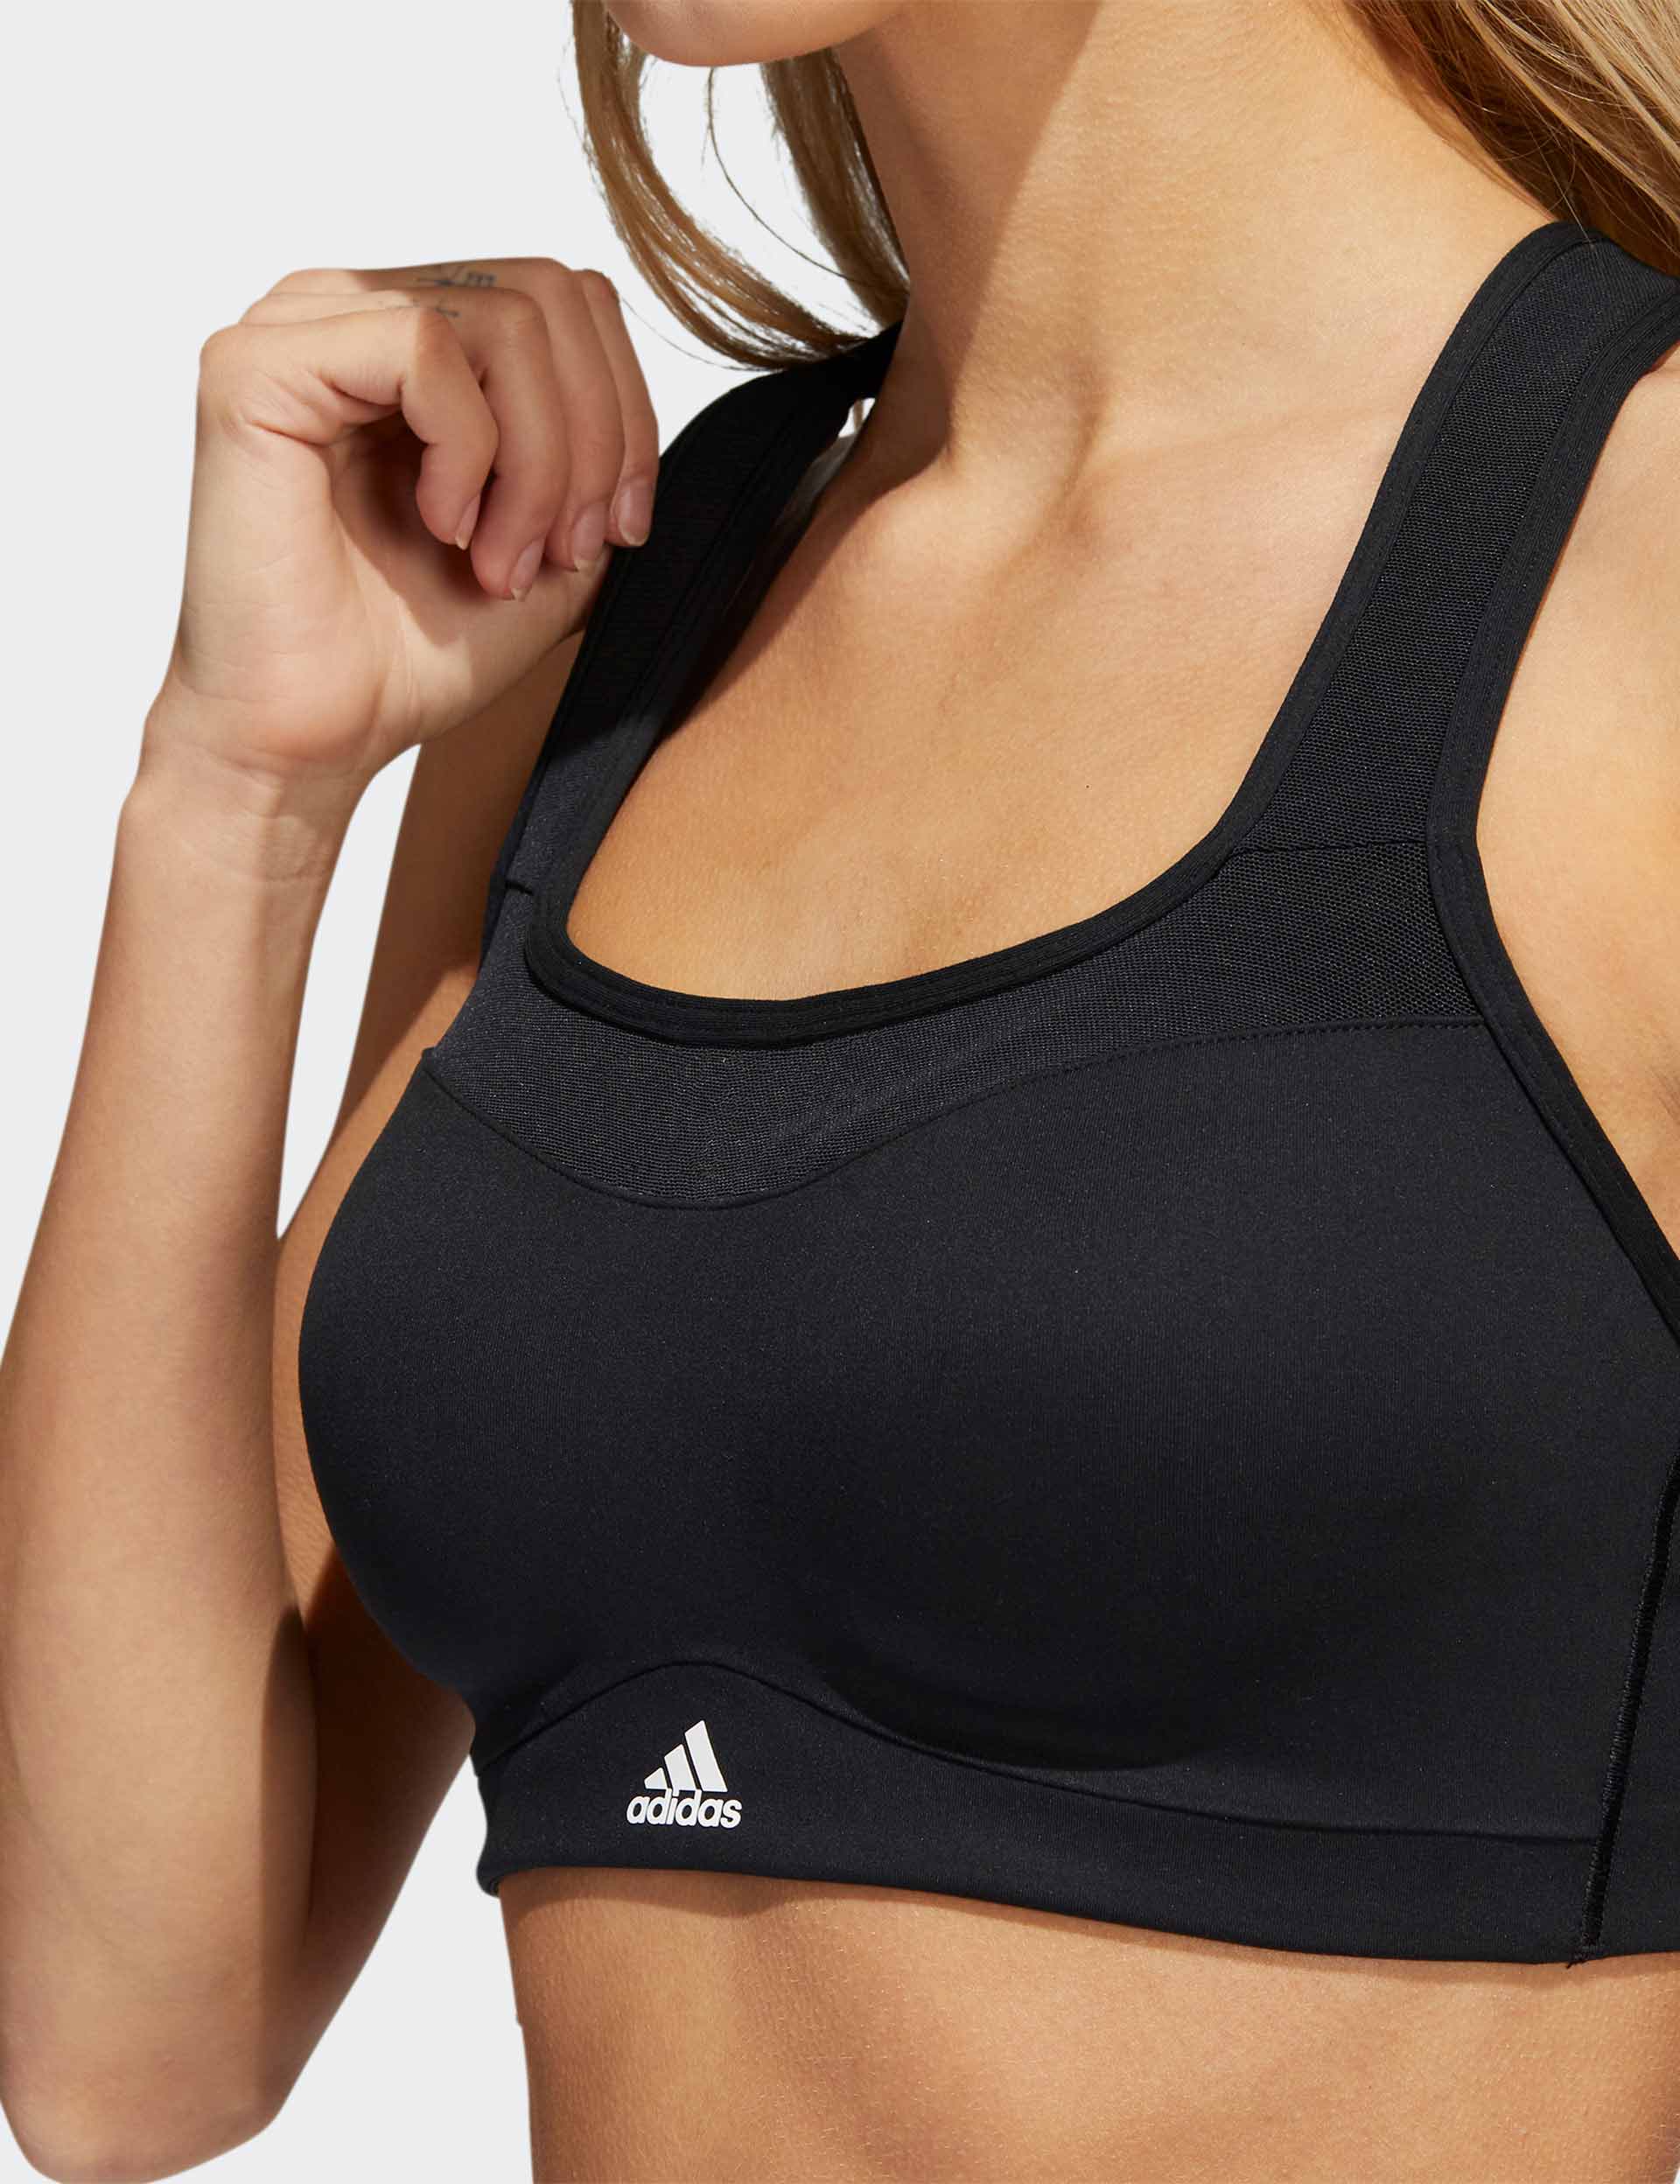 adidas TLRD Impact Luxe High-Support Zip Bra - Black | adidas Canada